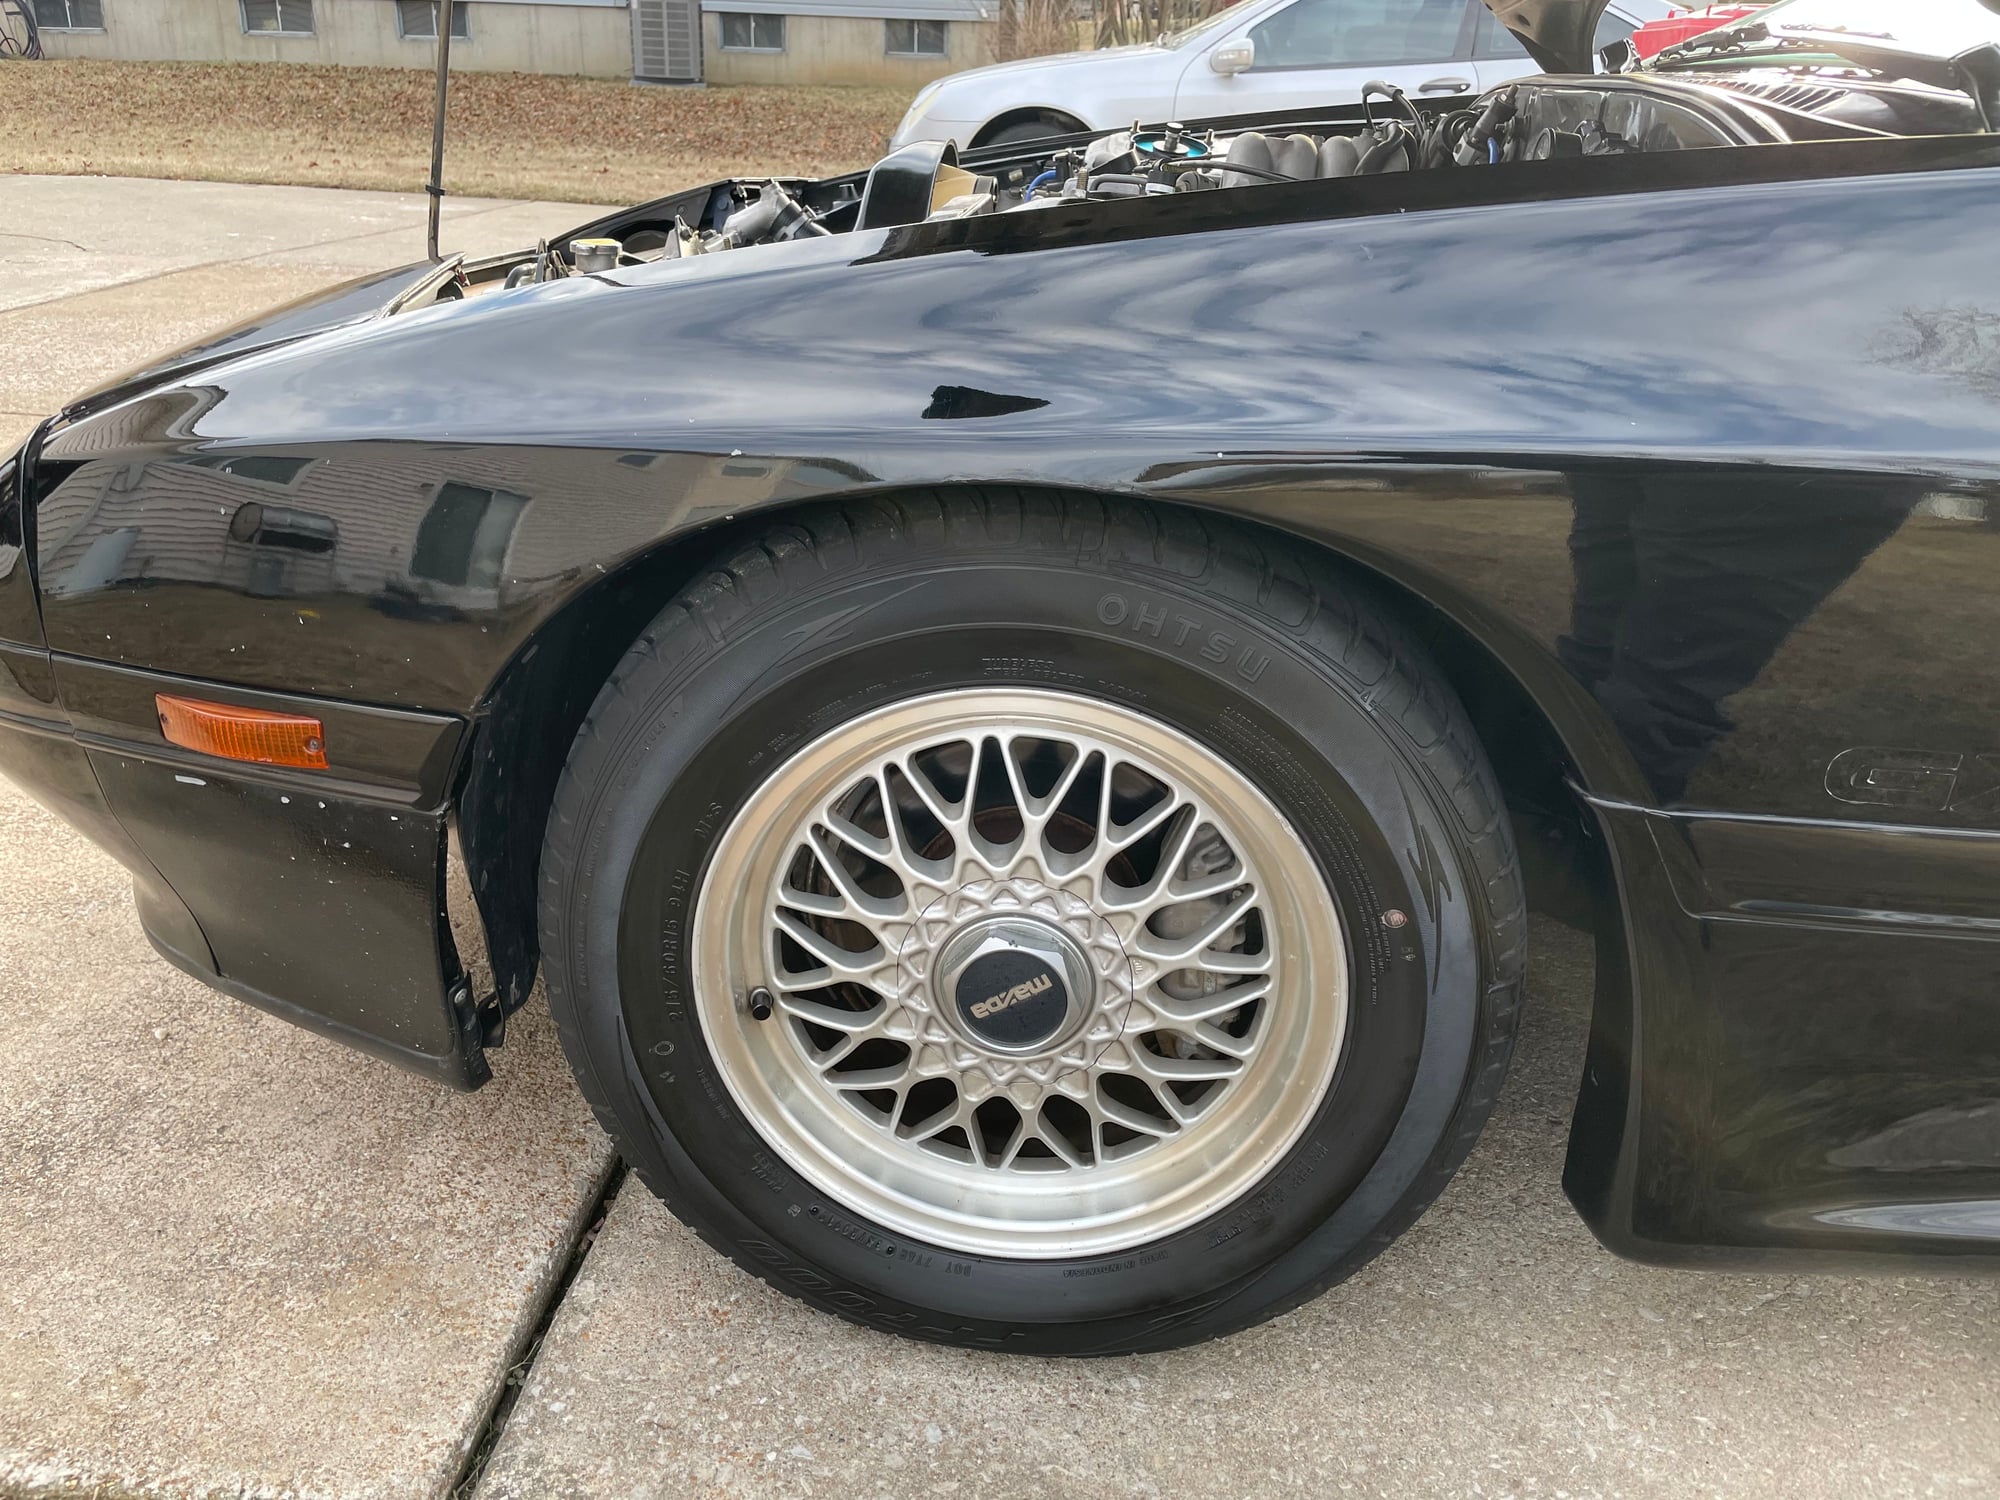 Wheels and Tires/Axles - Vert wheels mounted and blanced - Used - 1986 to 1991 Mazda RX-7 - Saint Louis, MO 63114, United States